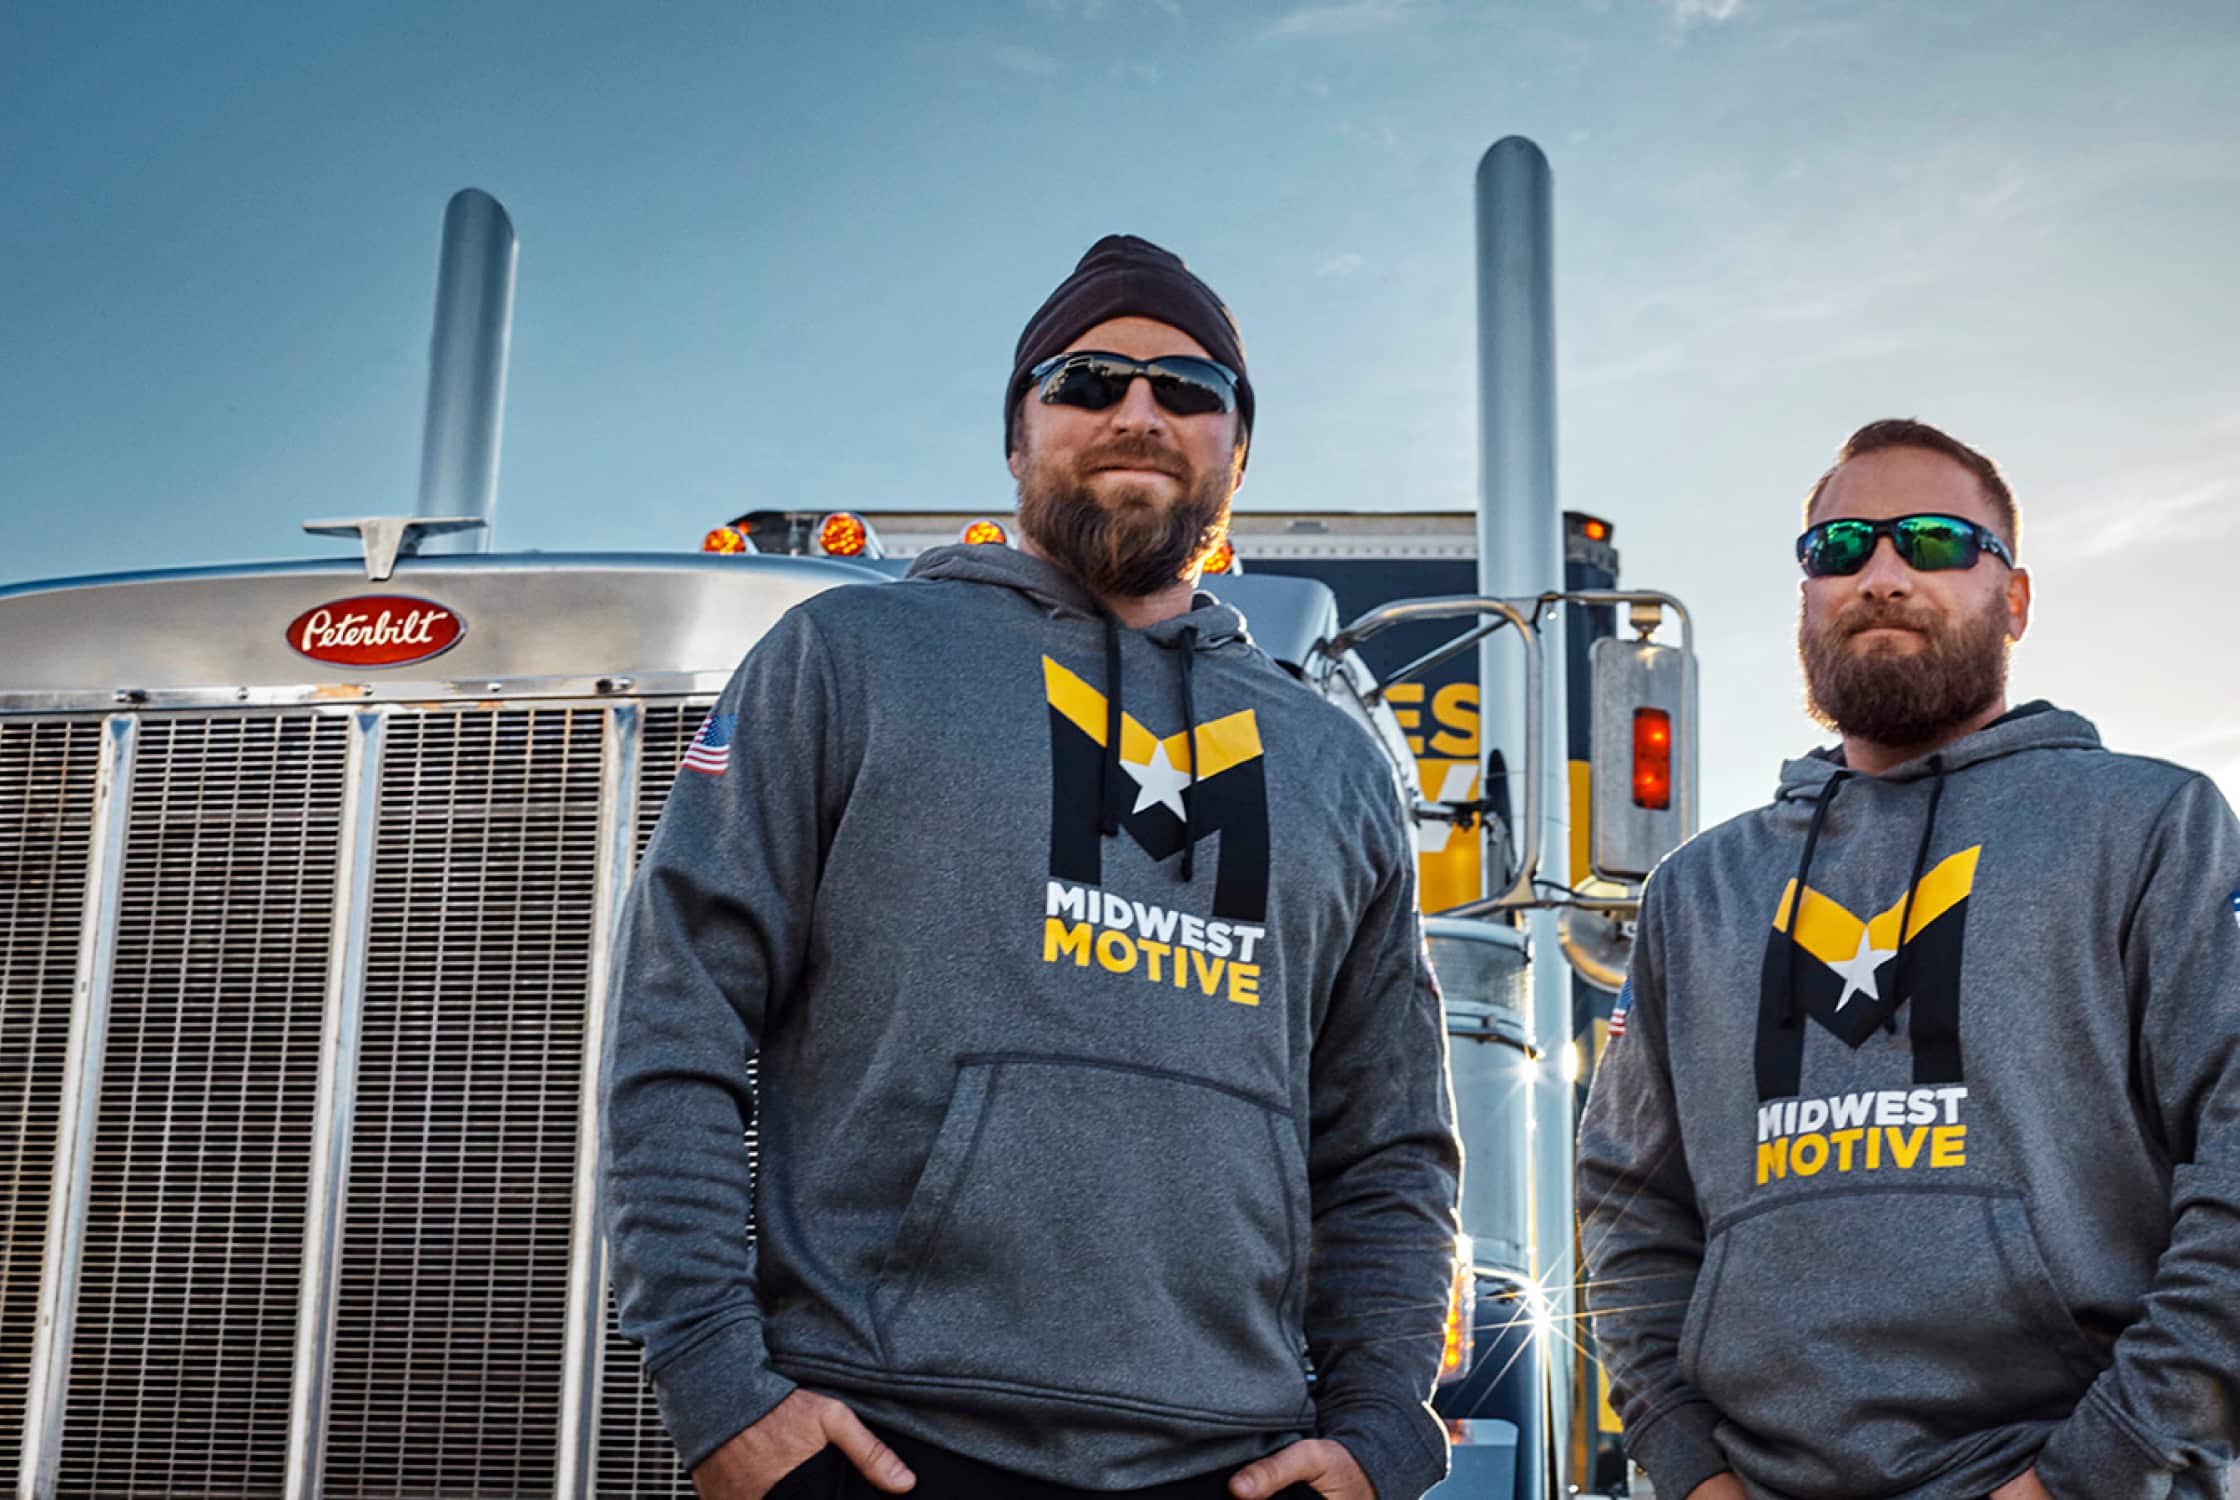 Midwest Motive drivers in front of a semi-truck.